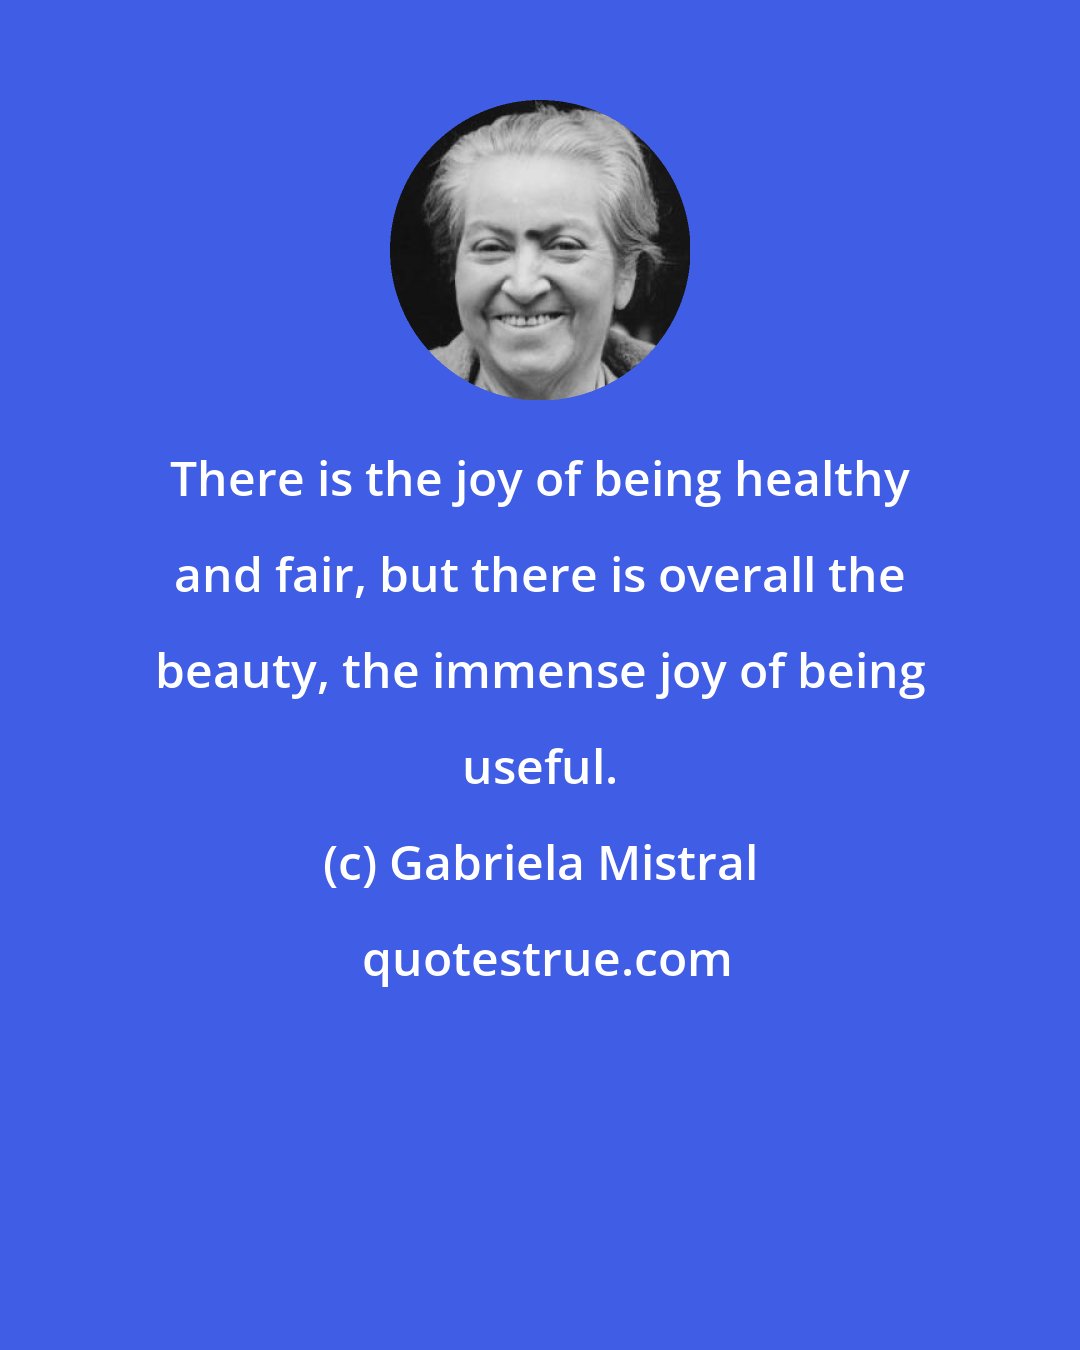 Gabriela Mistral: There is the joy of being healthy and fair, but there is overall the beauty, the immense joy of being useful.